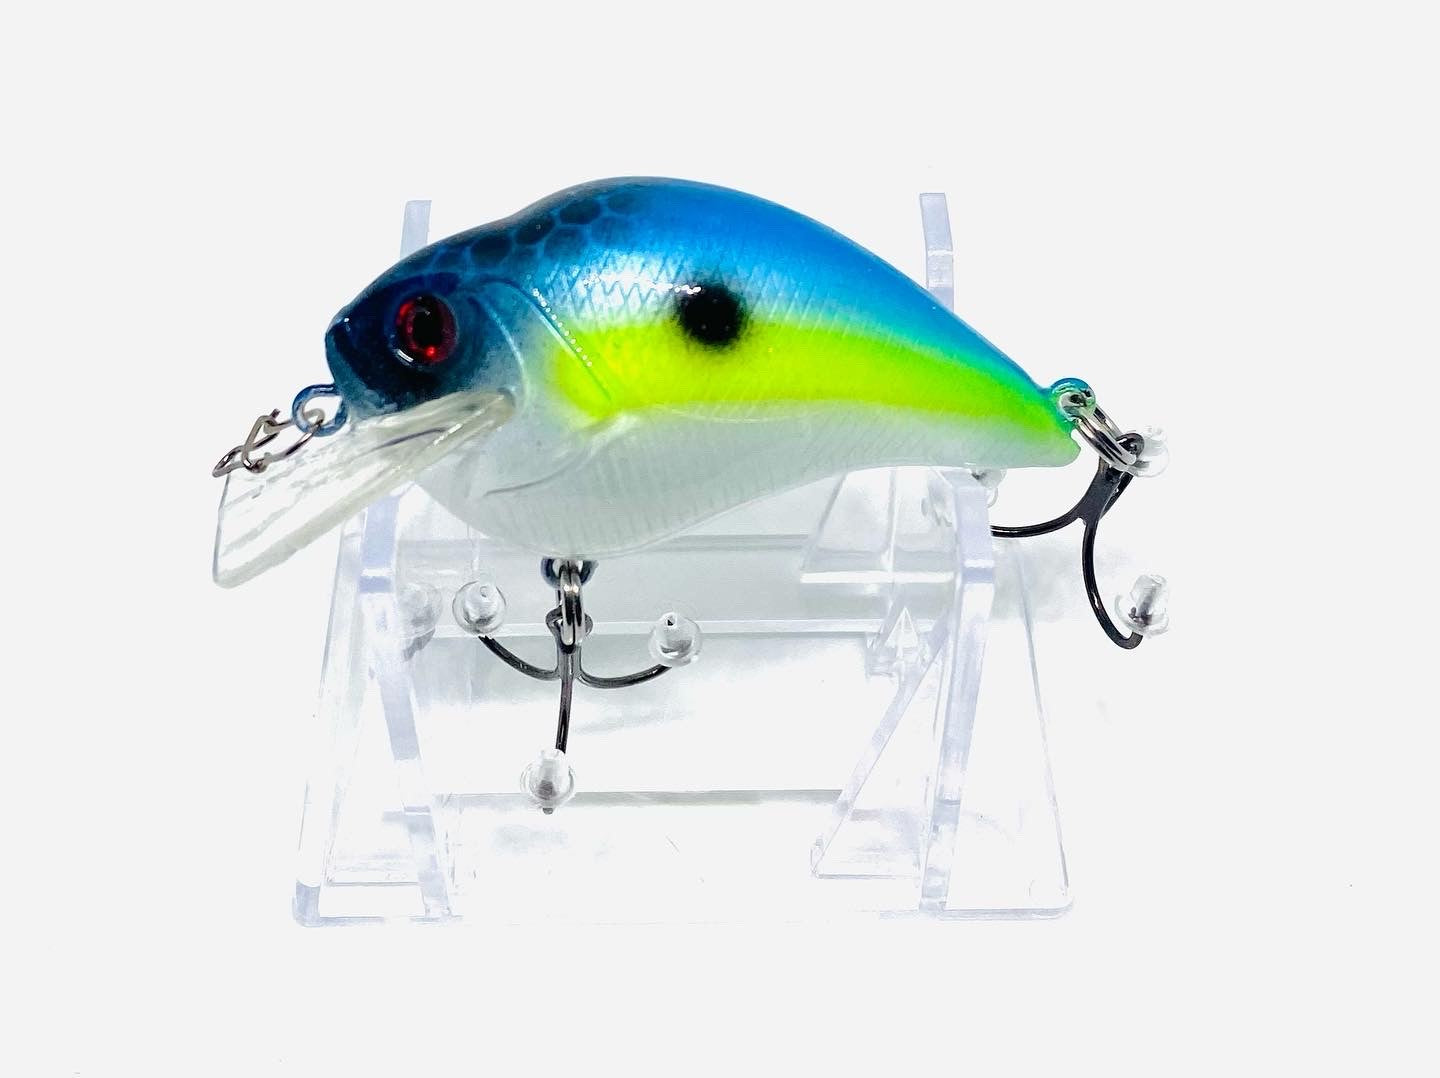 Best Brand or Type of airbrush paint for Painting hard bait fishing lures?  - Hard Baits -  - Tackle Building Forums